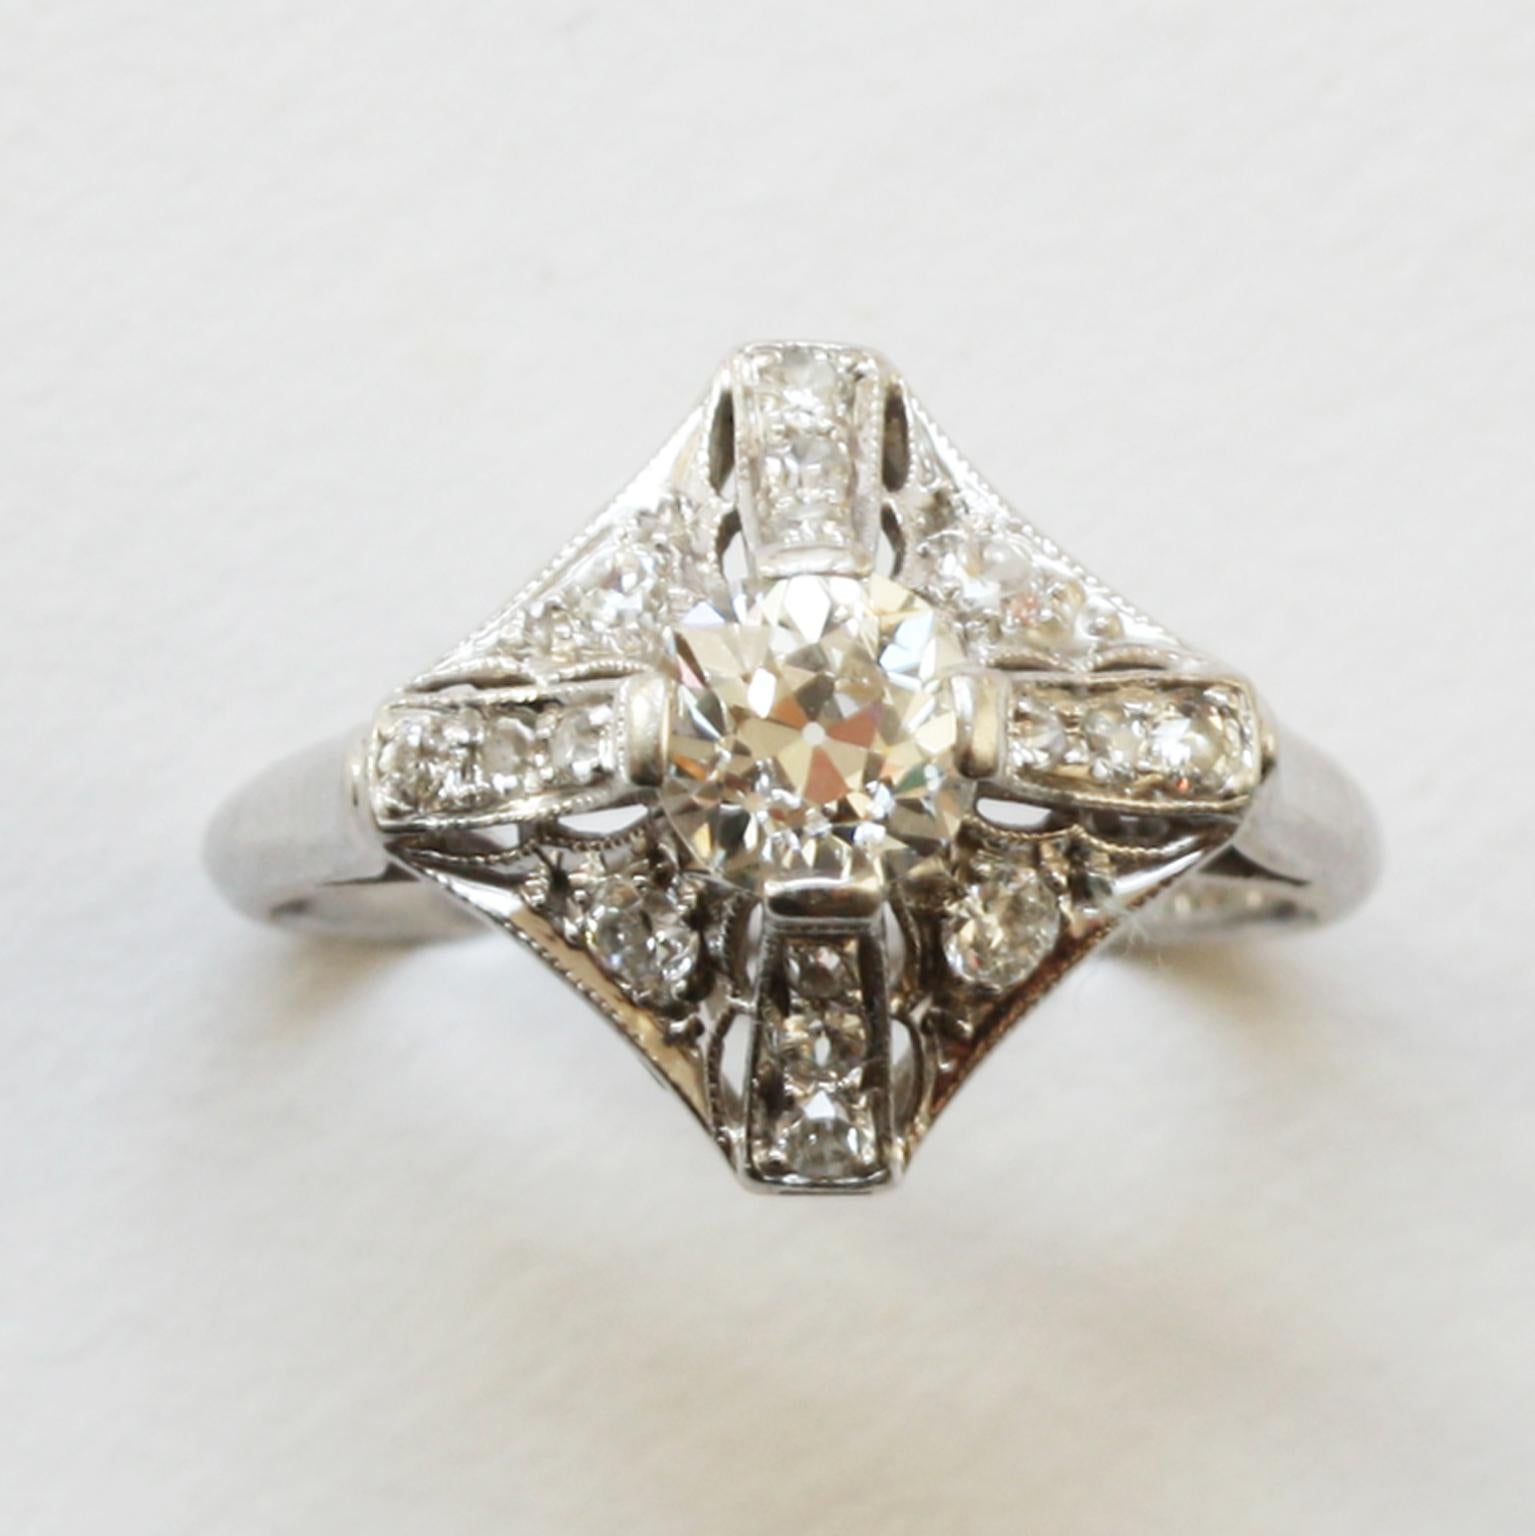 A platinum and diamond Art Deco ring set with old cut diamonds (app. 0.9 carats), signed: Peacock, for C.D. Peacock from Chigaco, American, circa 1920.

ring size: 16- mm. 5 ¼ US.
weight: 3.61 gram